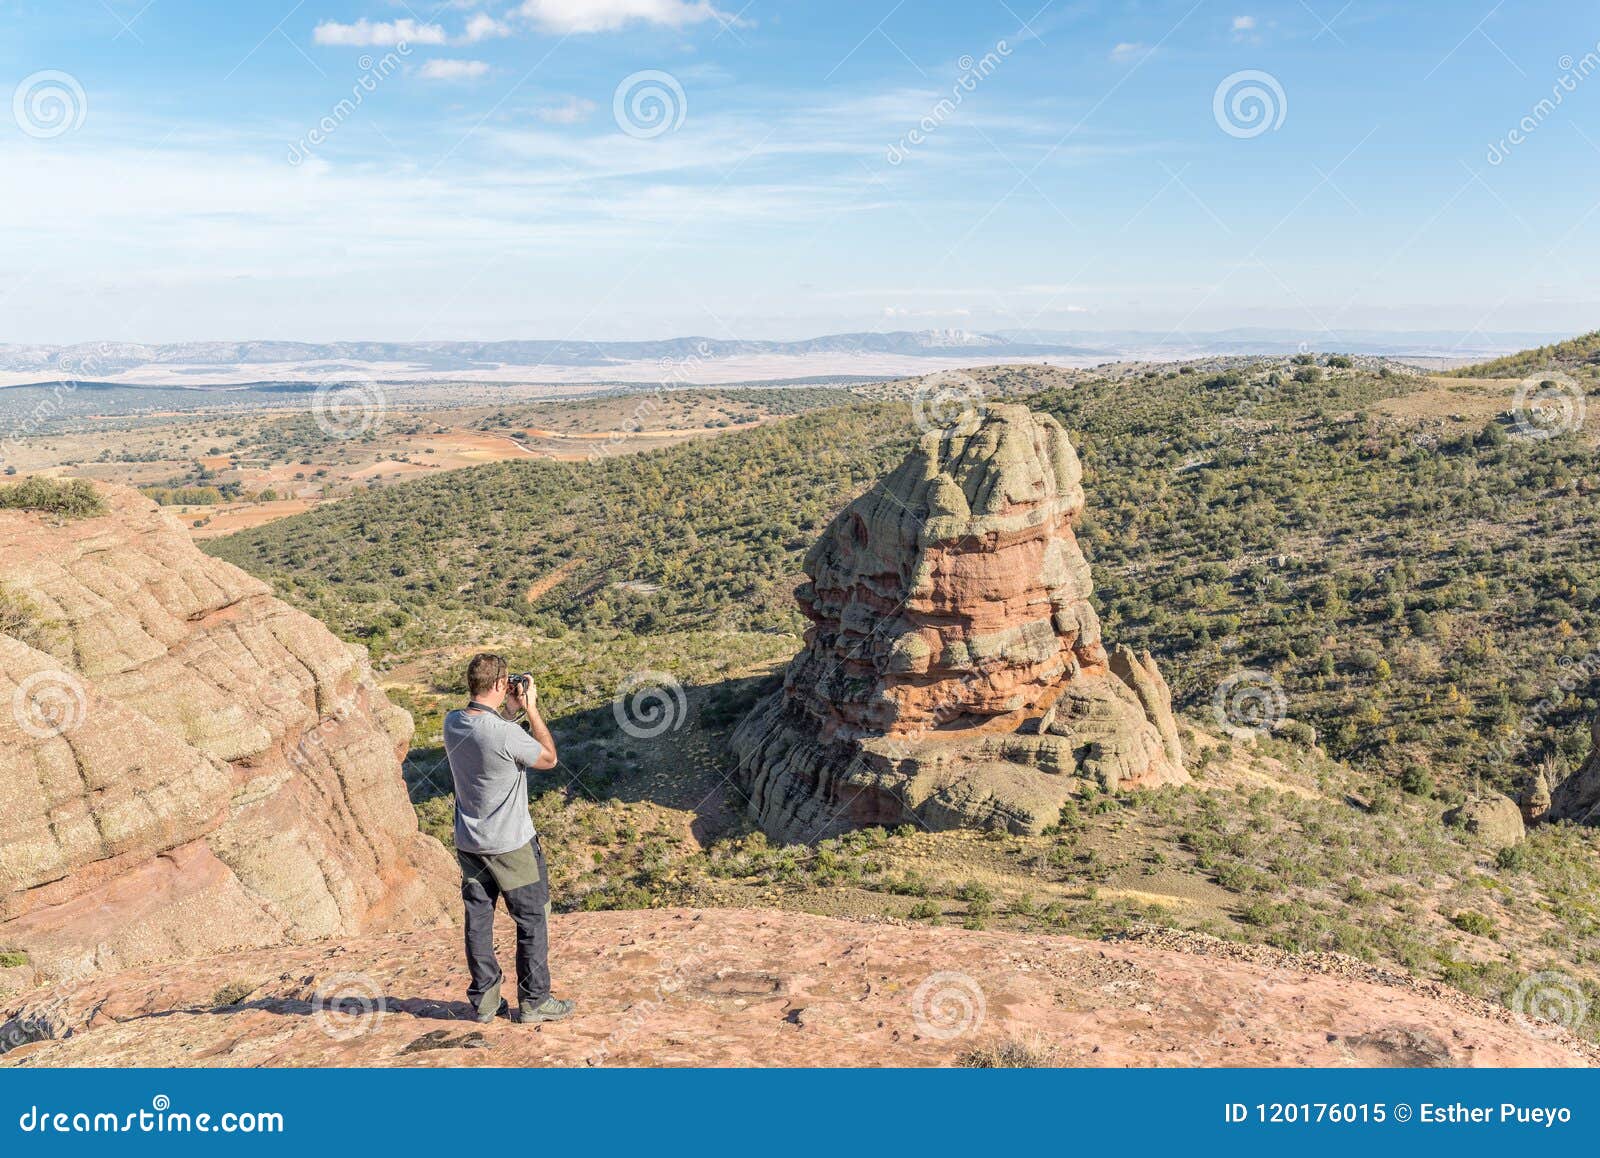 young man taking a photo of a rodeno boulder in perecens, teruel, spain.